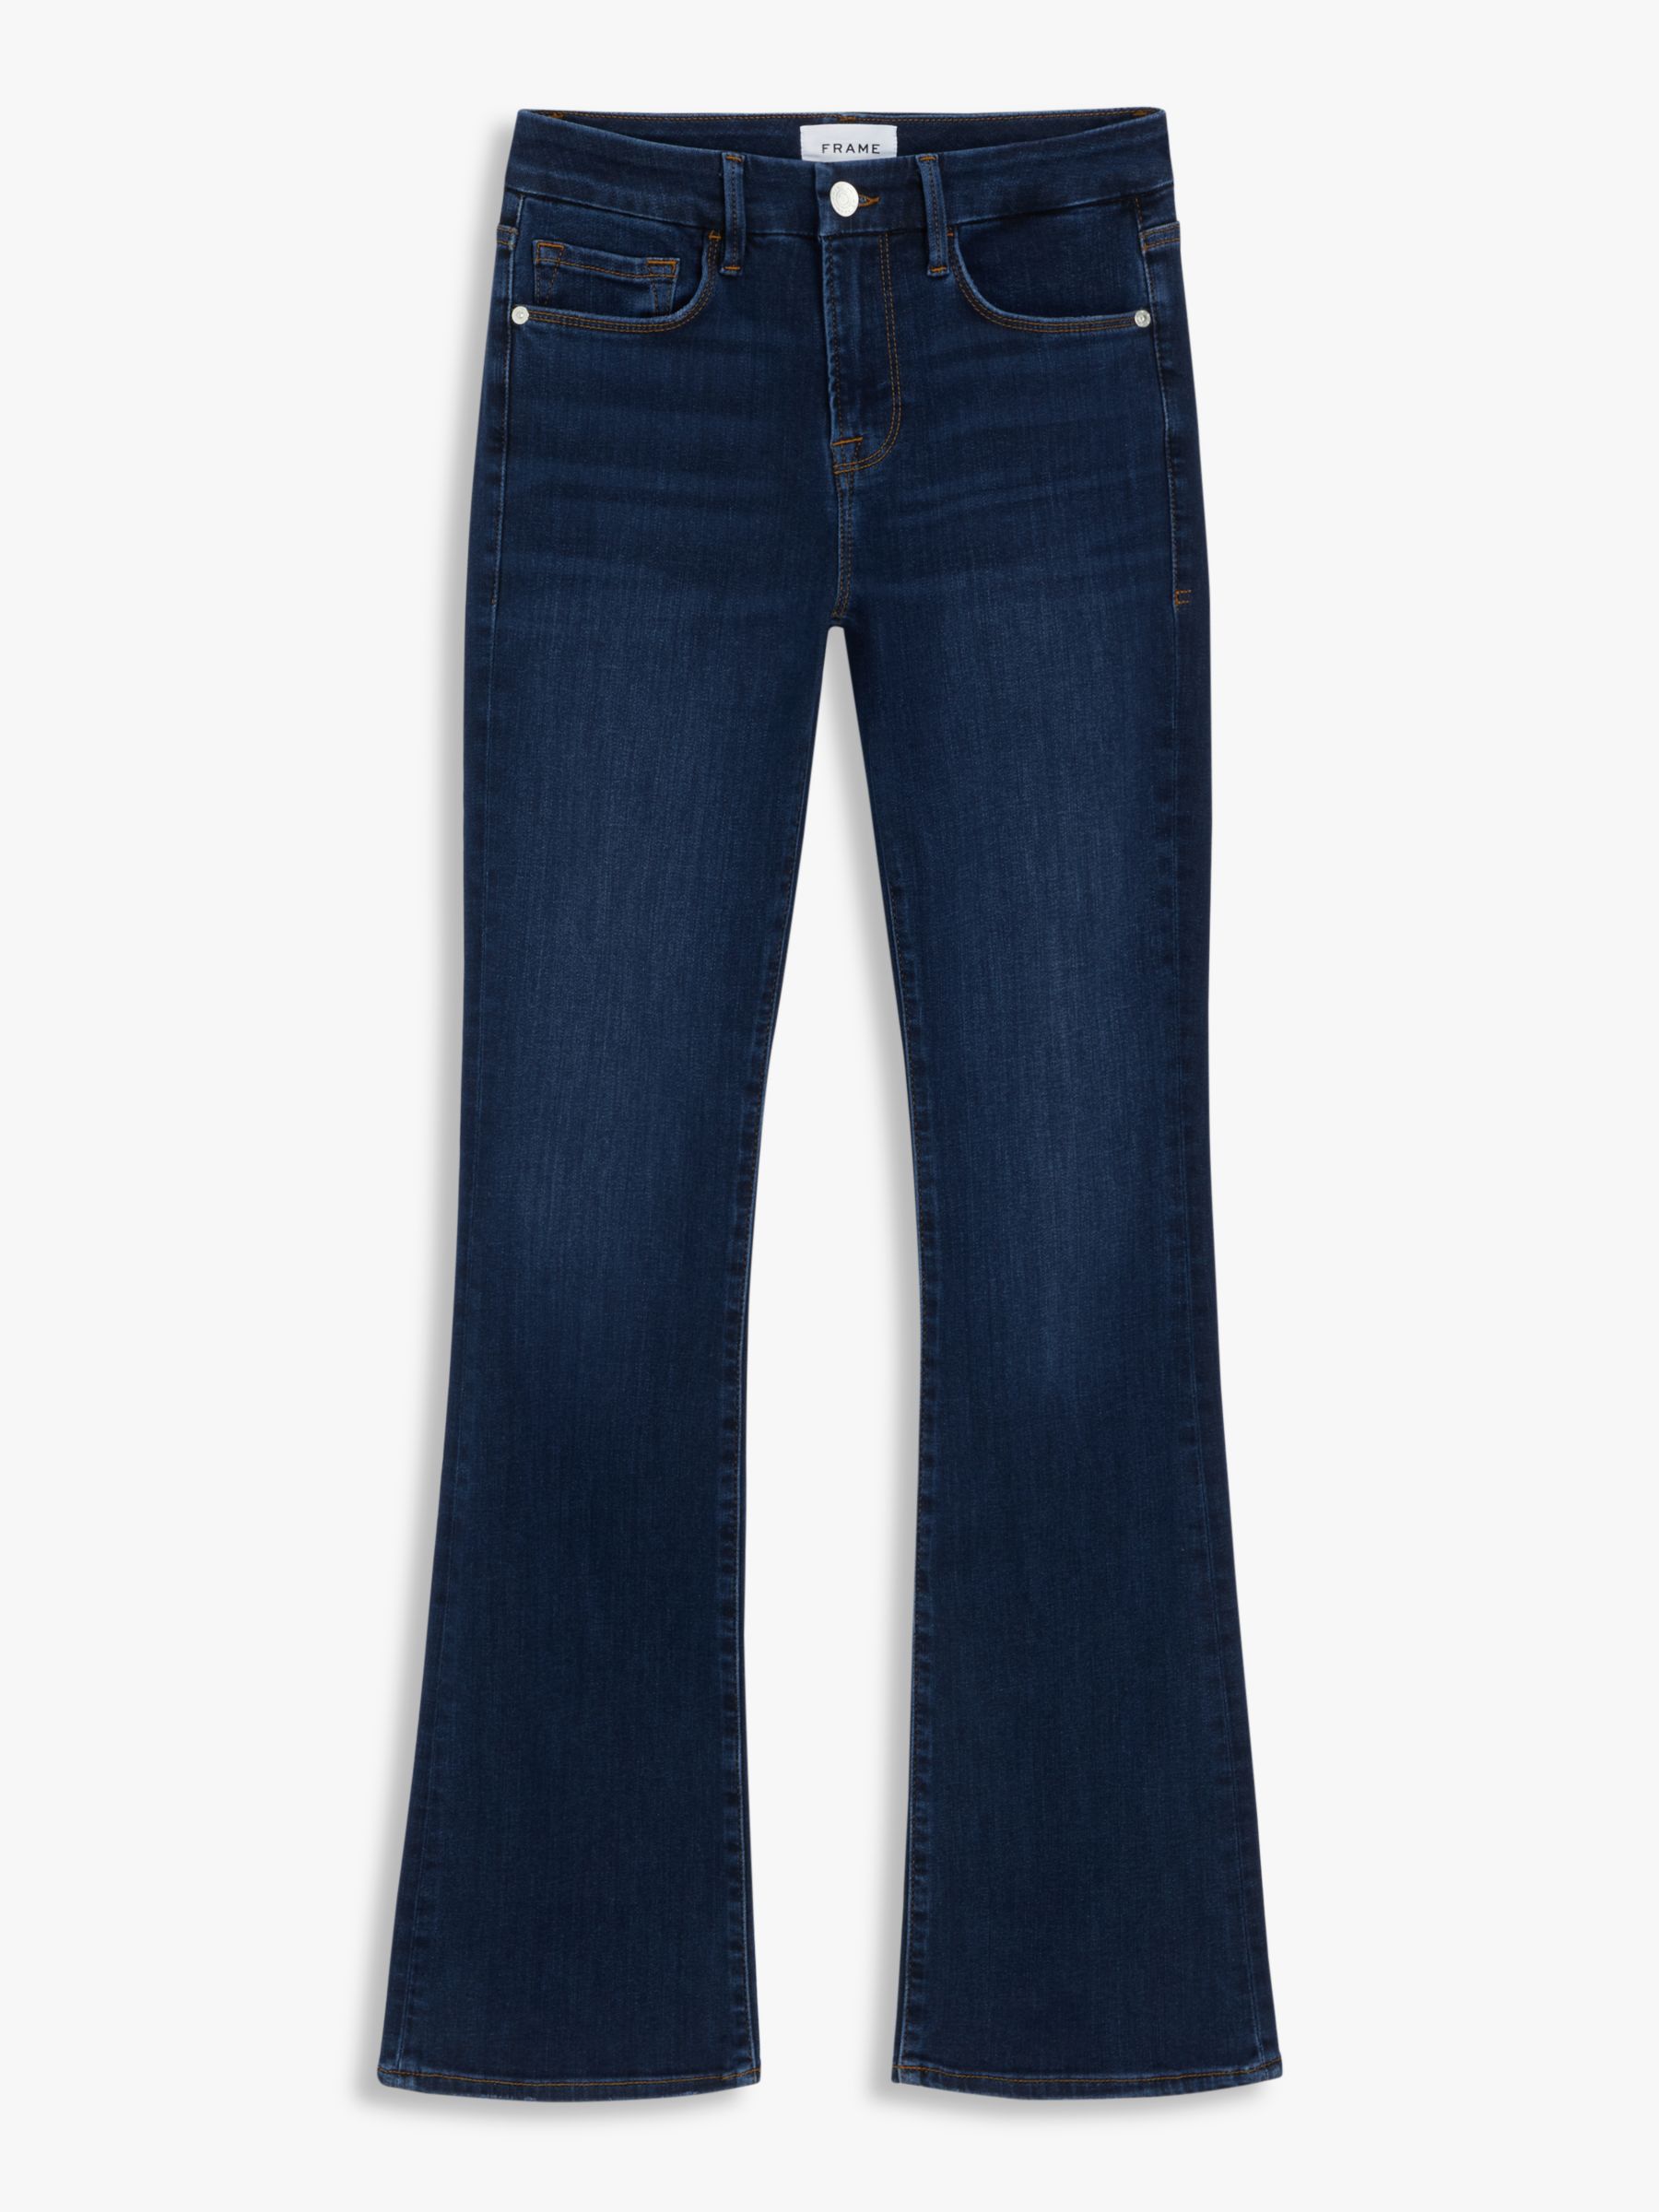 FRAME Le Mini Bootcut Jeans, Majesty at John Lewis & Partners